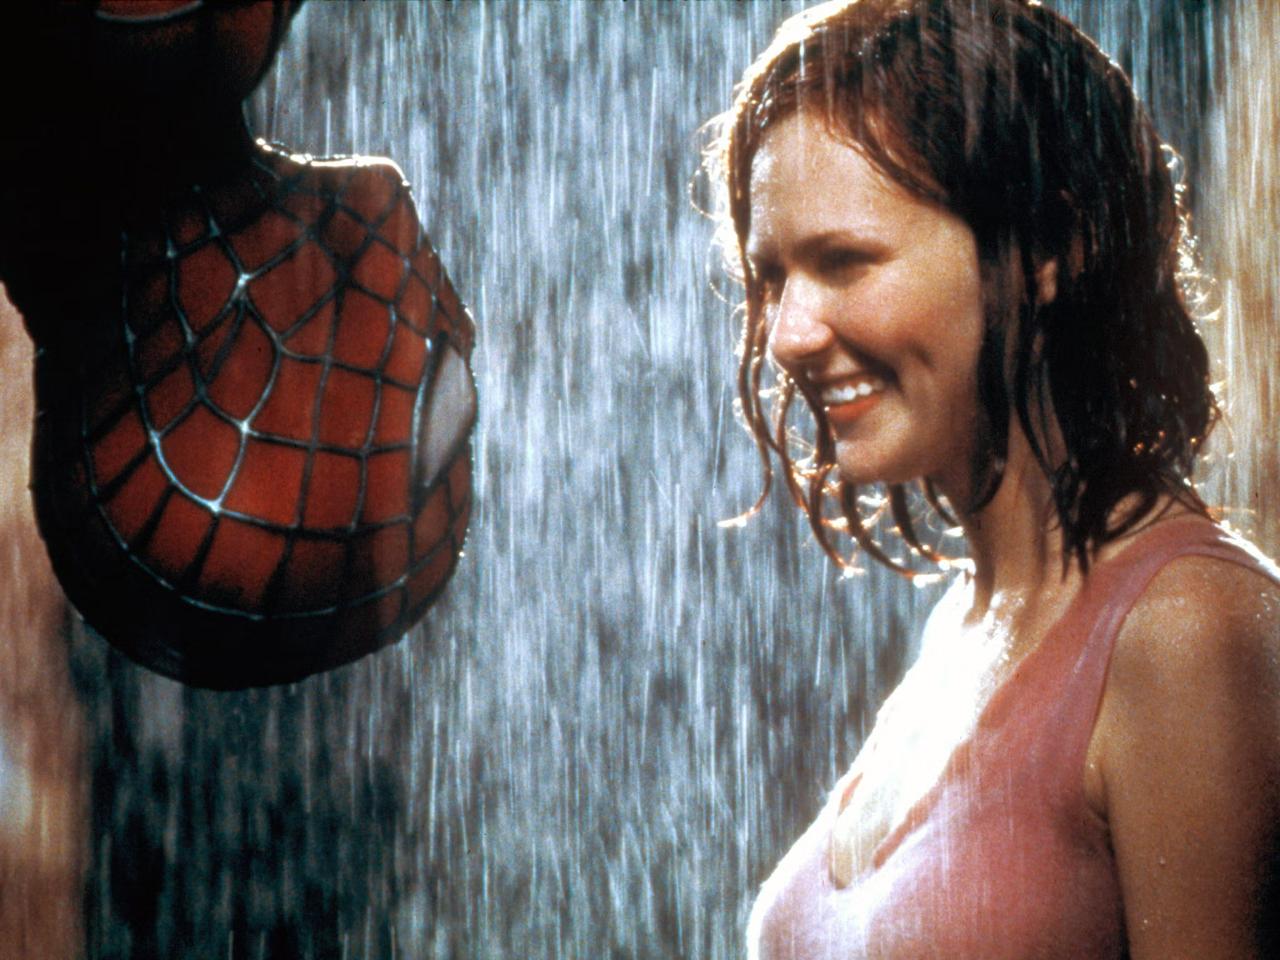 Spiderman (2002)
No matter how many movies are made about the DC hero, the original remains a fan favourite